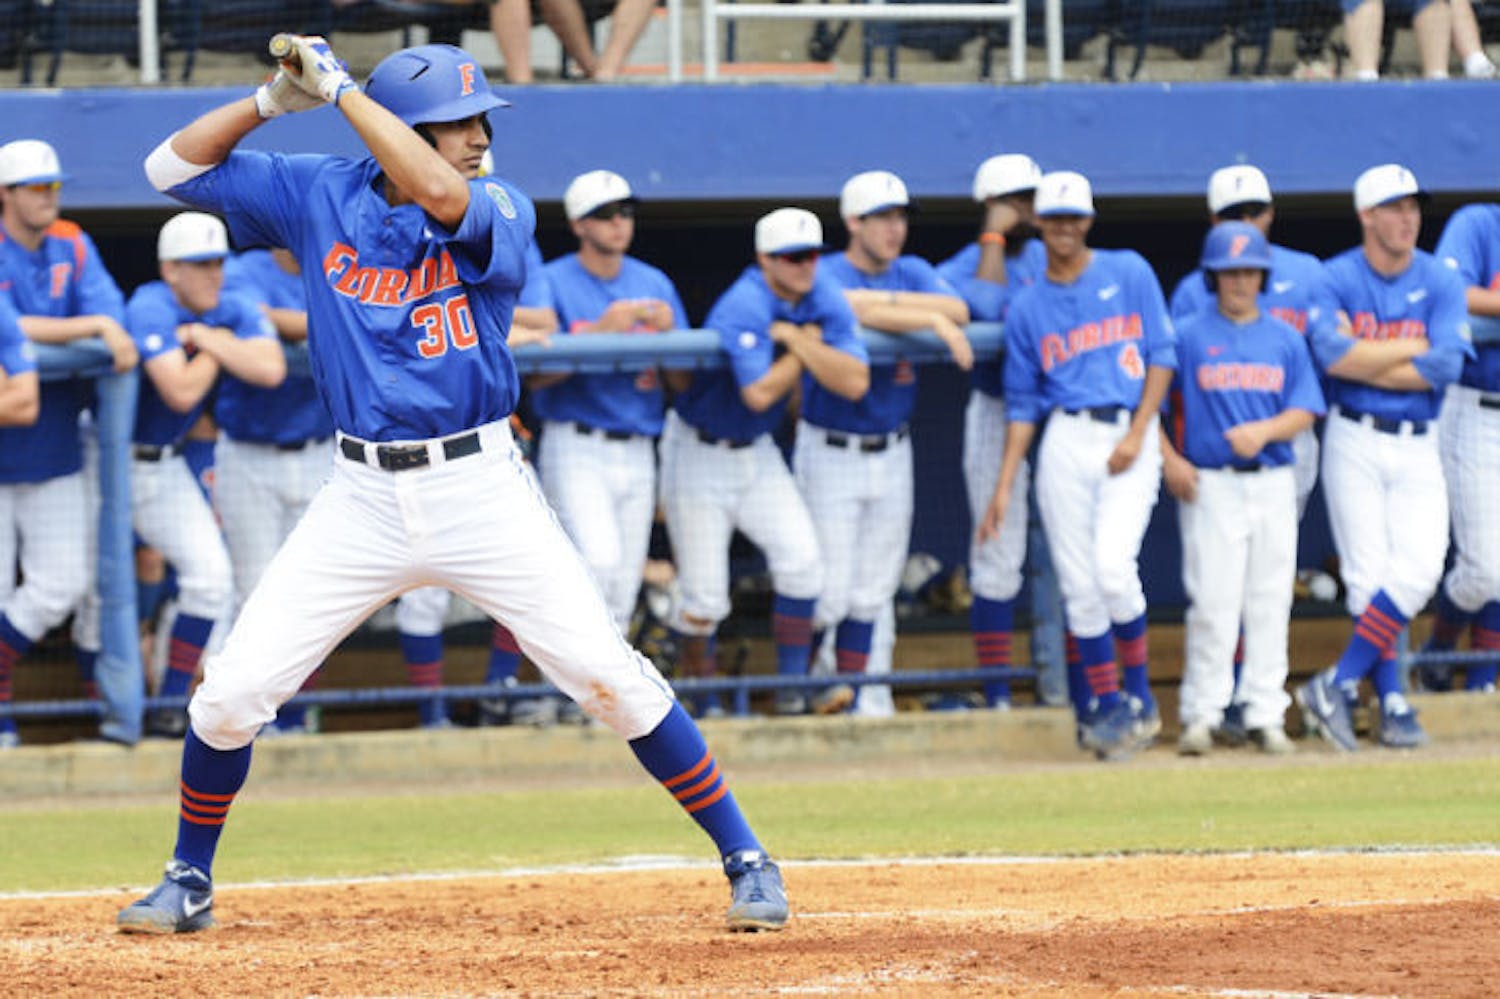 First baseman Vickash Ramjit bats during Florida’s 4-0 win against Ole Miss at McKethan Stadium on Sunday. Ramjit went 1 for 11 at the plate against Auburn.